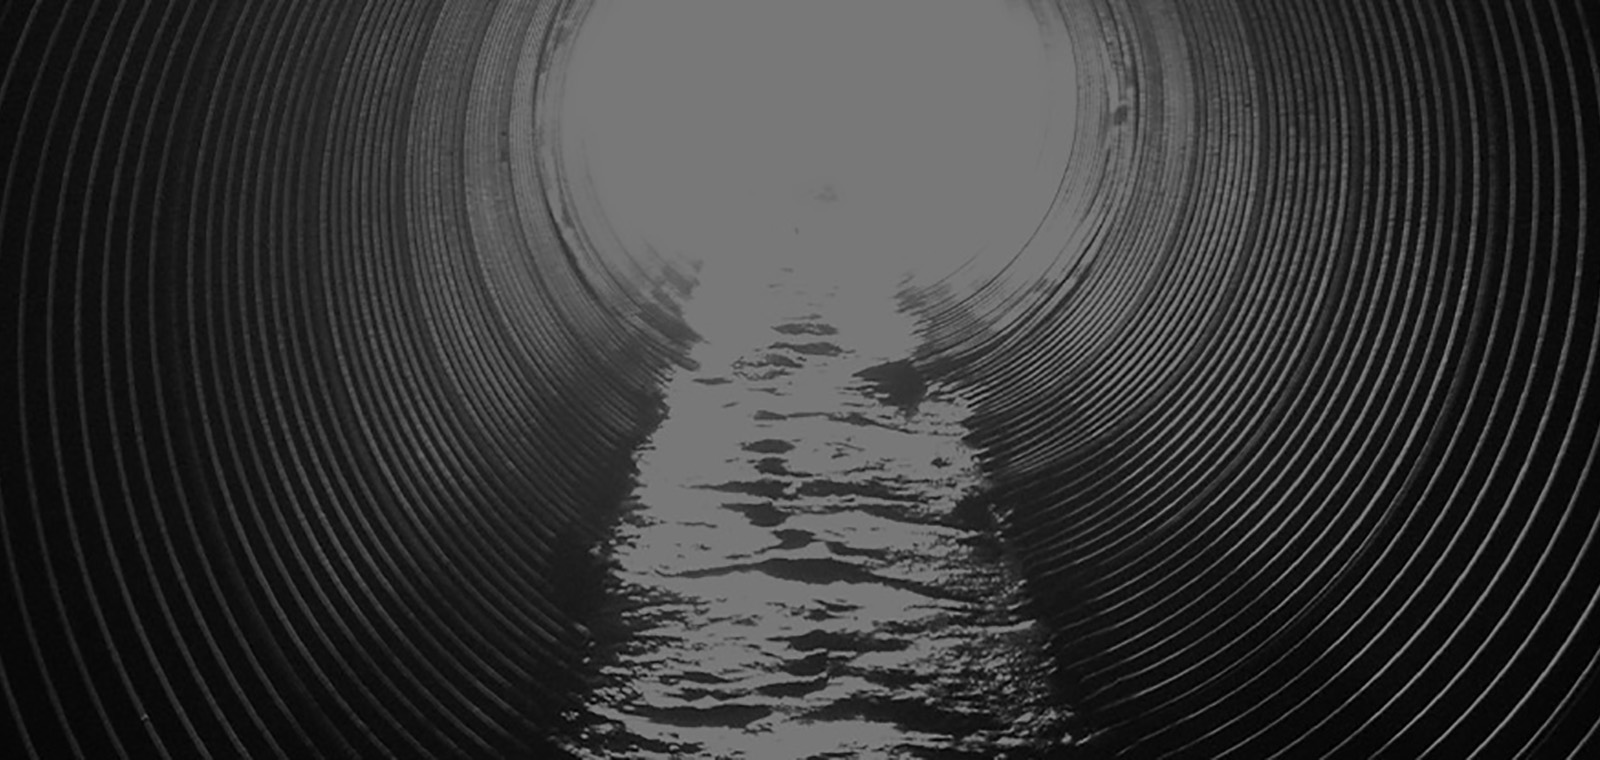 Looking through a corrugated drainage tunnel partially filled with flowing water toward a bright light at its opening.